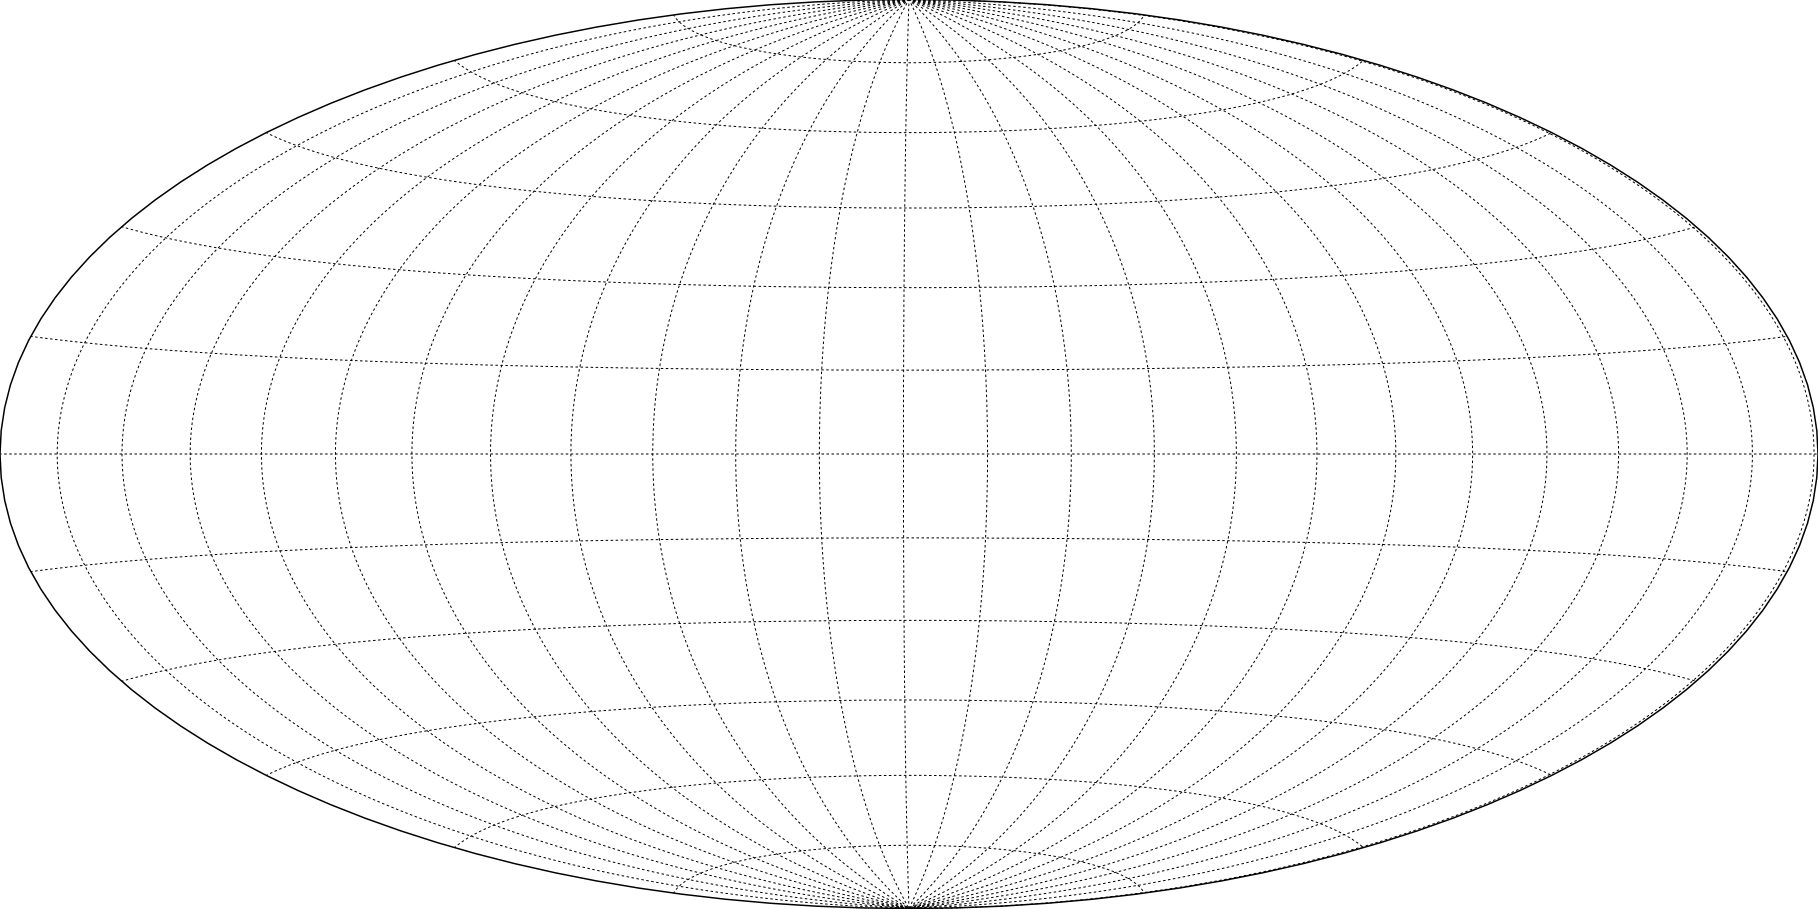 A Hammer projection showing only lines of latitude and longitude without landforms or other features.